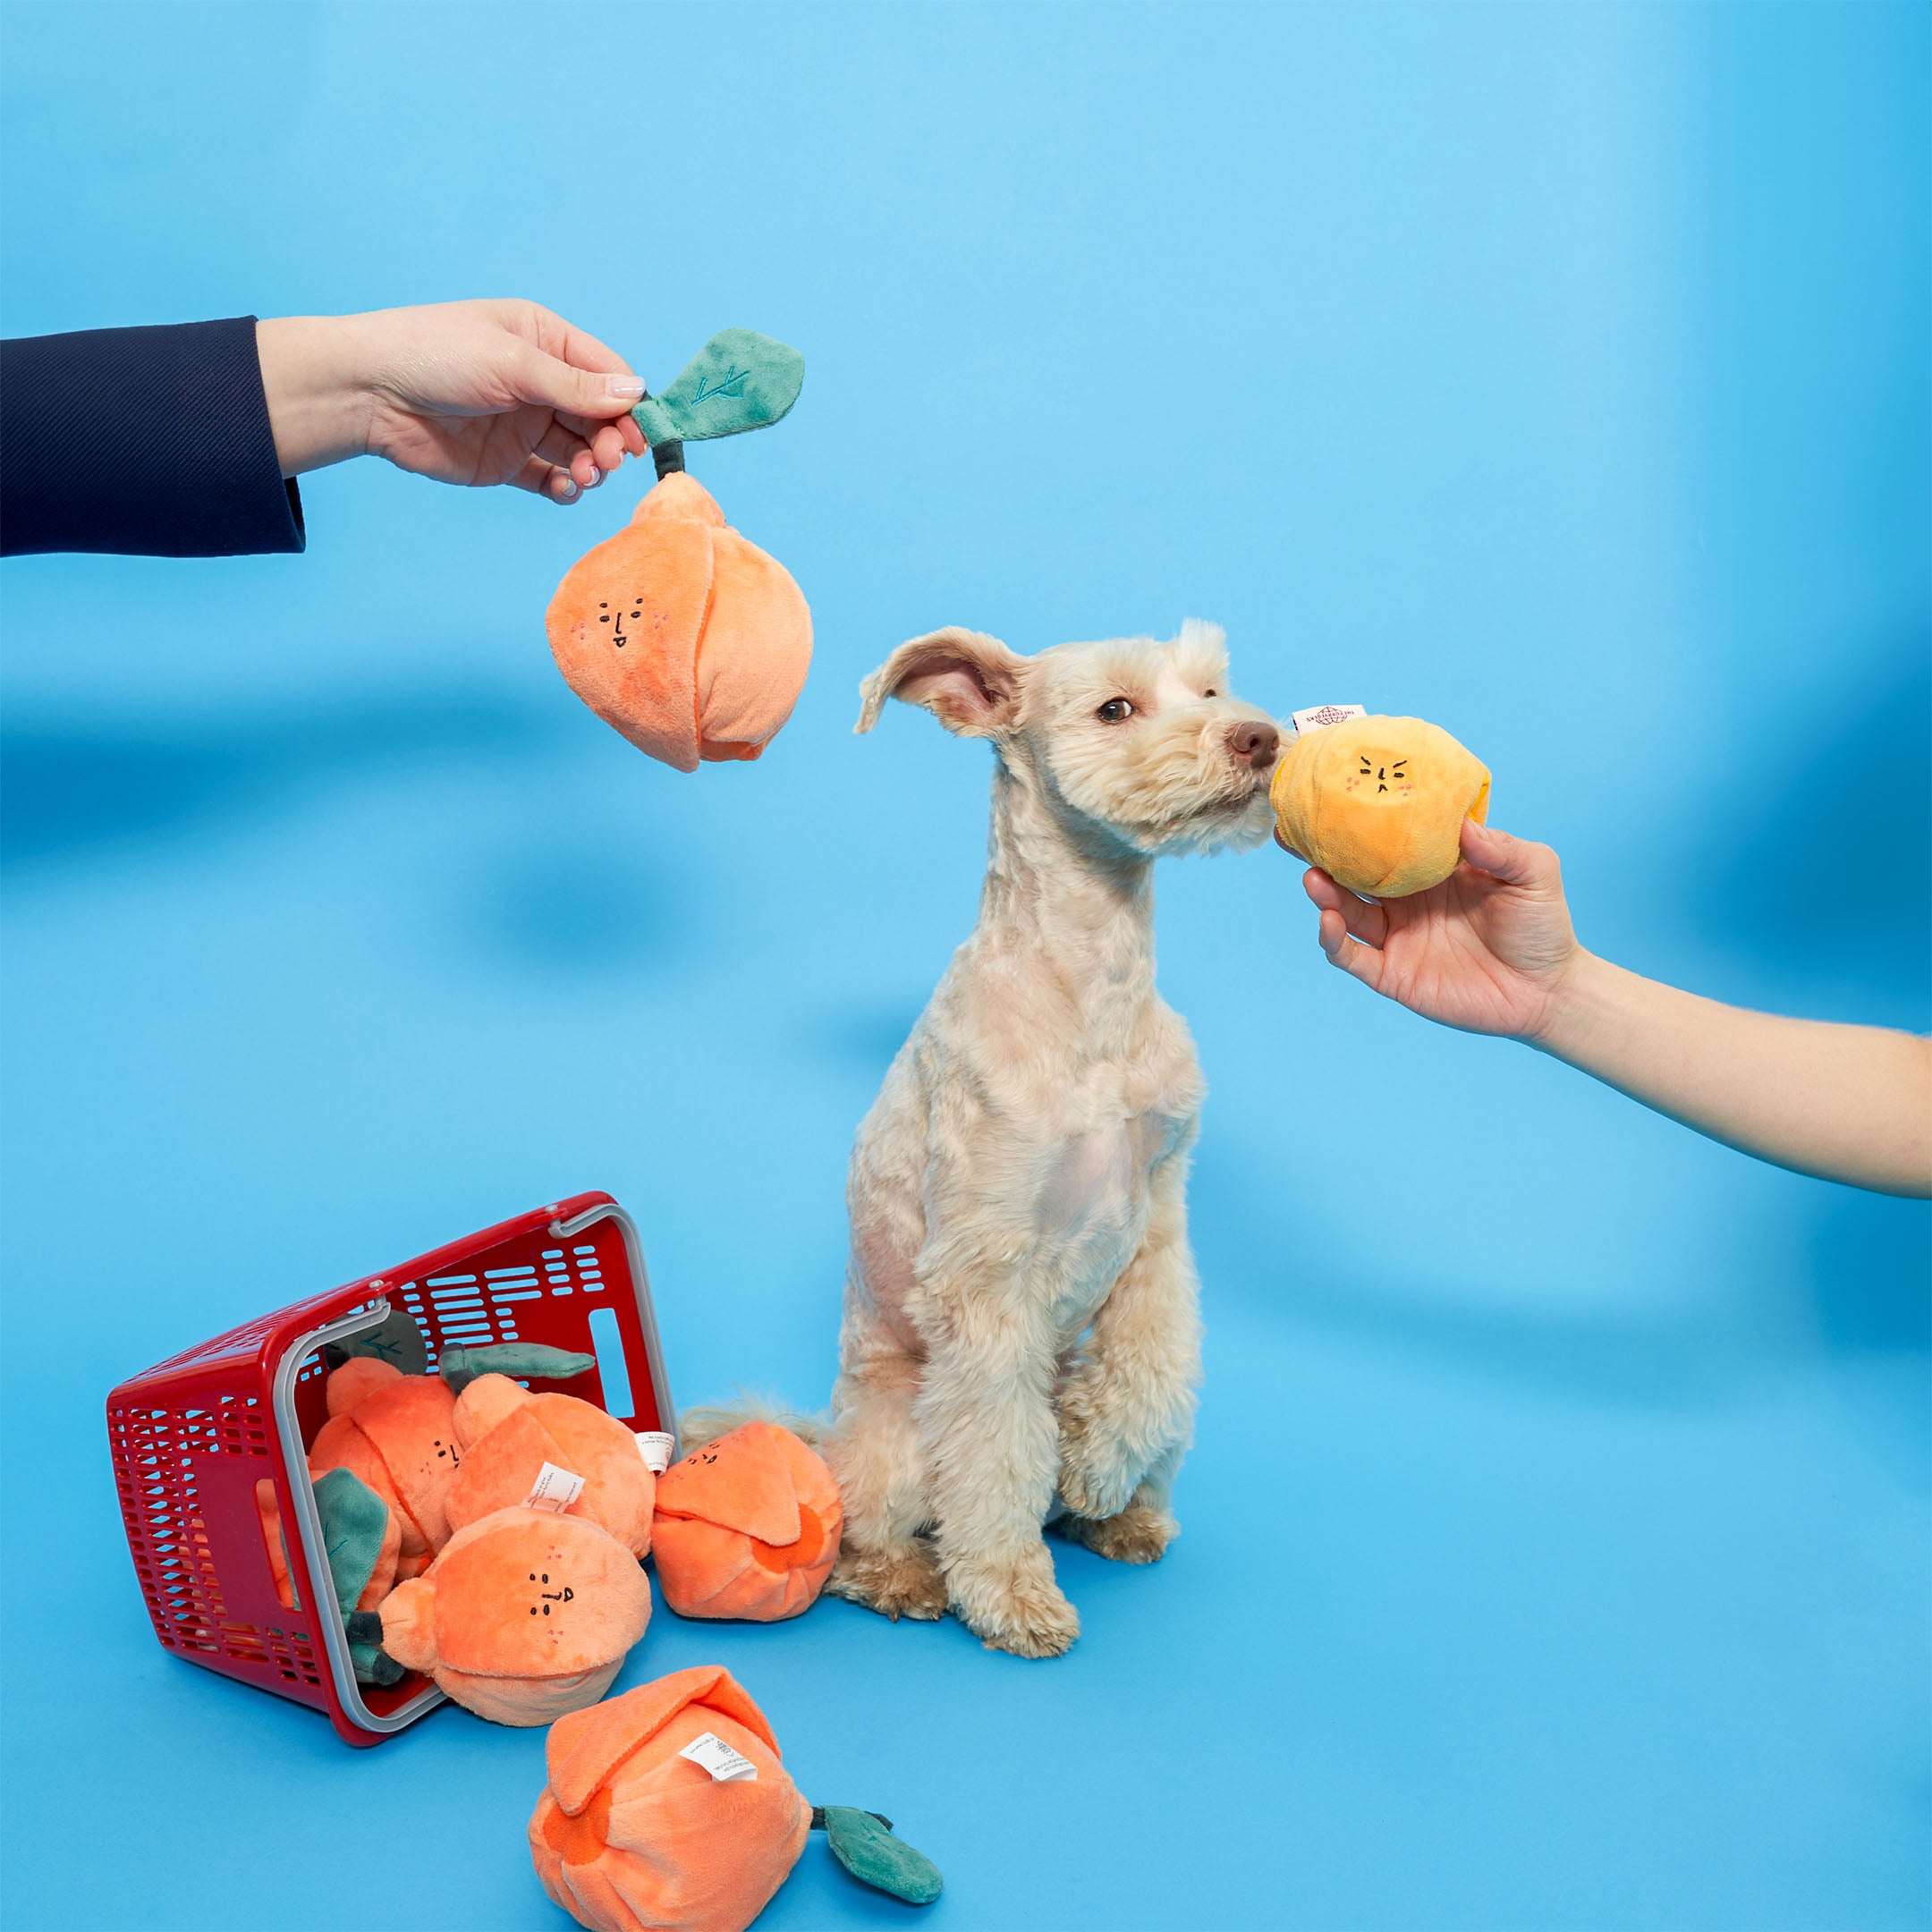  A tan dog sits attentively on a blue background, looking at an orange-shaped dog toy offered by a human hand. Another hand holds a similar toy above, and a red shopping basket filled with more toys is tipped over beside the dog.